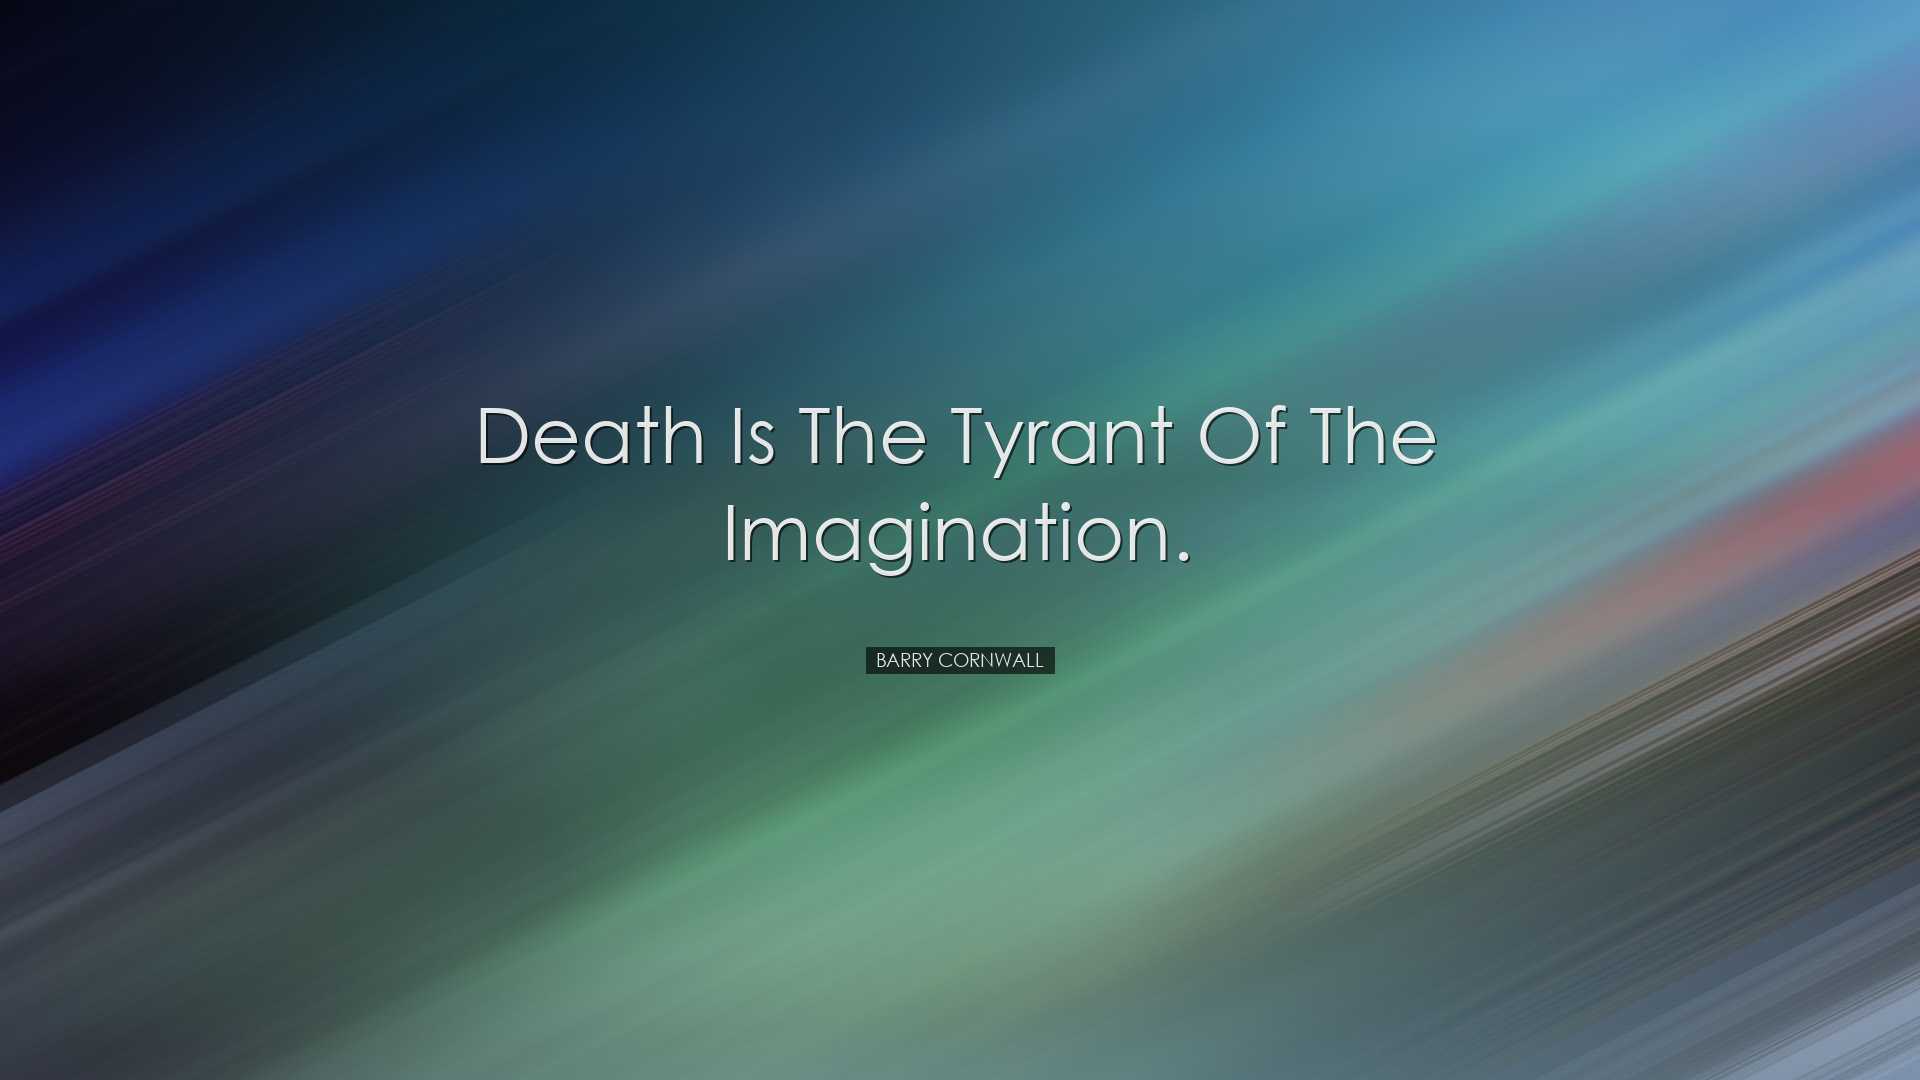 Death is the tyrant of the imagination. - Barry Cornwall